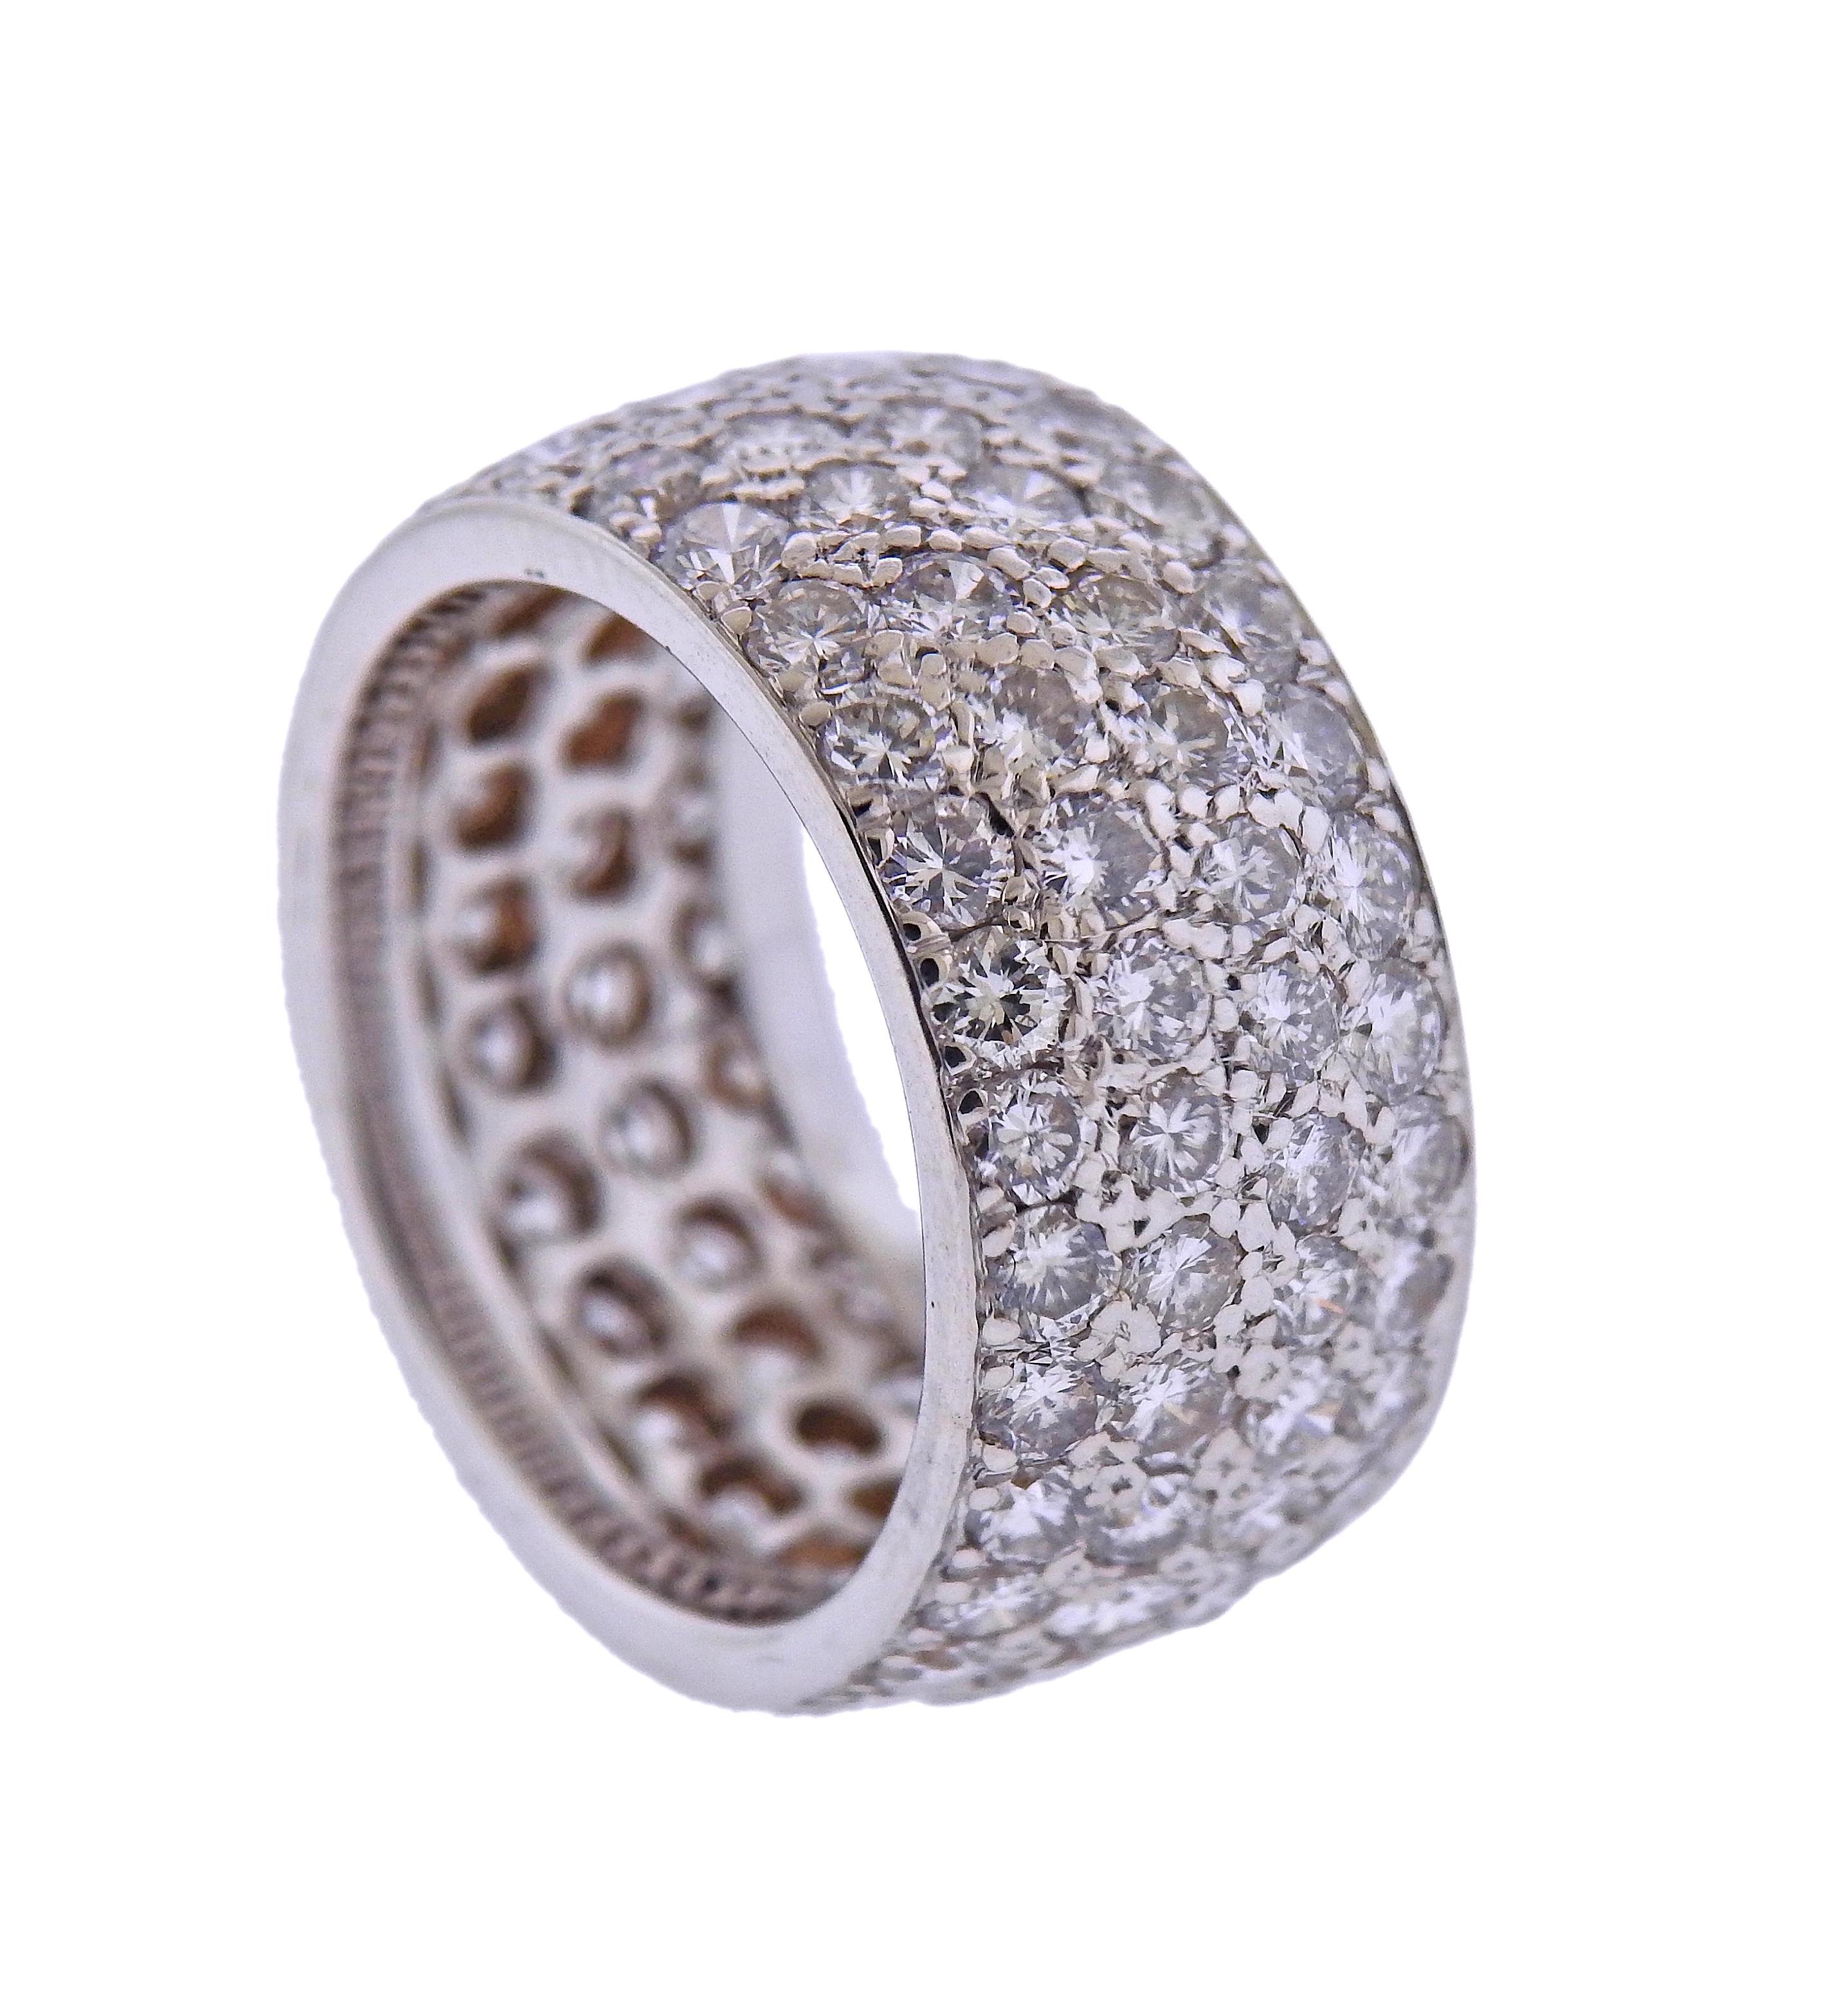 Wide 14k white gold wedding band ring, with 4 rows of round diamonds - approx. 4.20ctw. Ring size 6, ring is 10mm wide. Weight - 6.9 grams. 